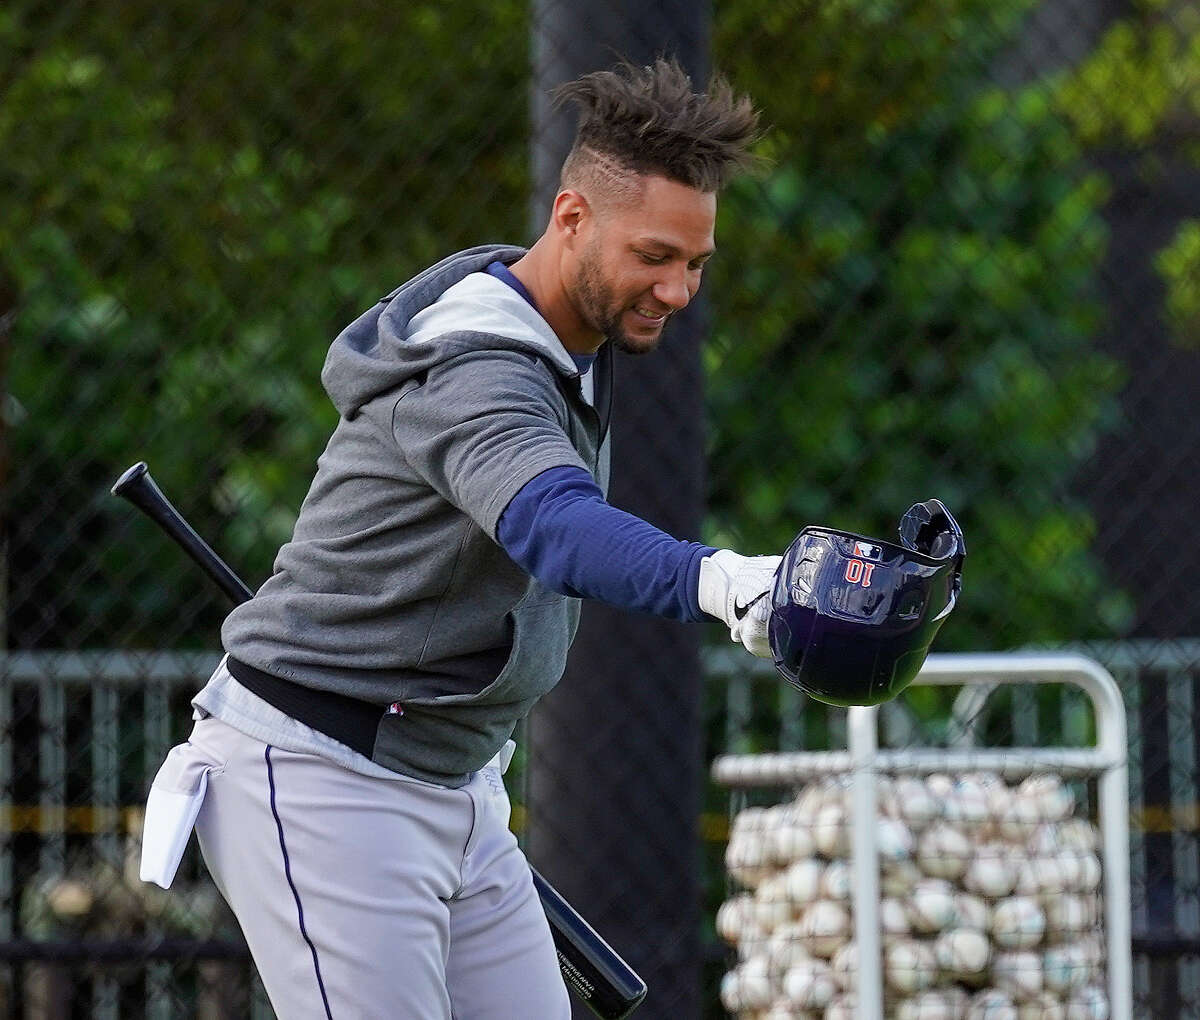 Houston Astros Yuli Gurriel takes a bow after he homered off of pitcher Framber Valdez during a live batting practice session at spring training workout in The Ballpark of the Palm Beaches facility on Saturday, March 19, 2022 in West Palm Beach .